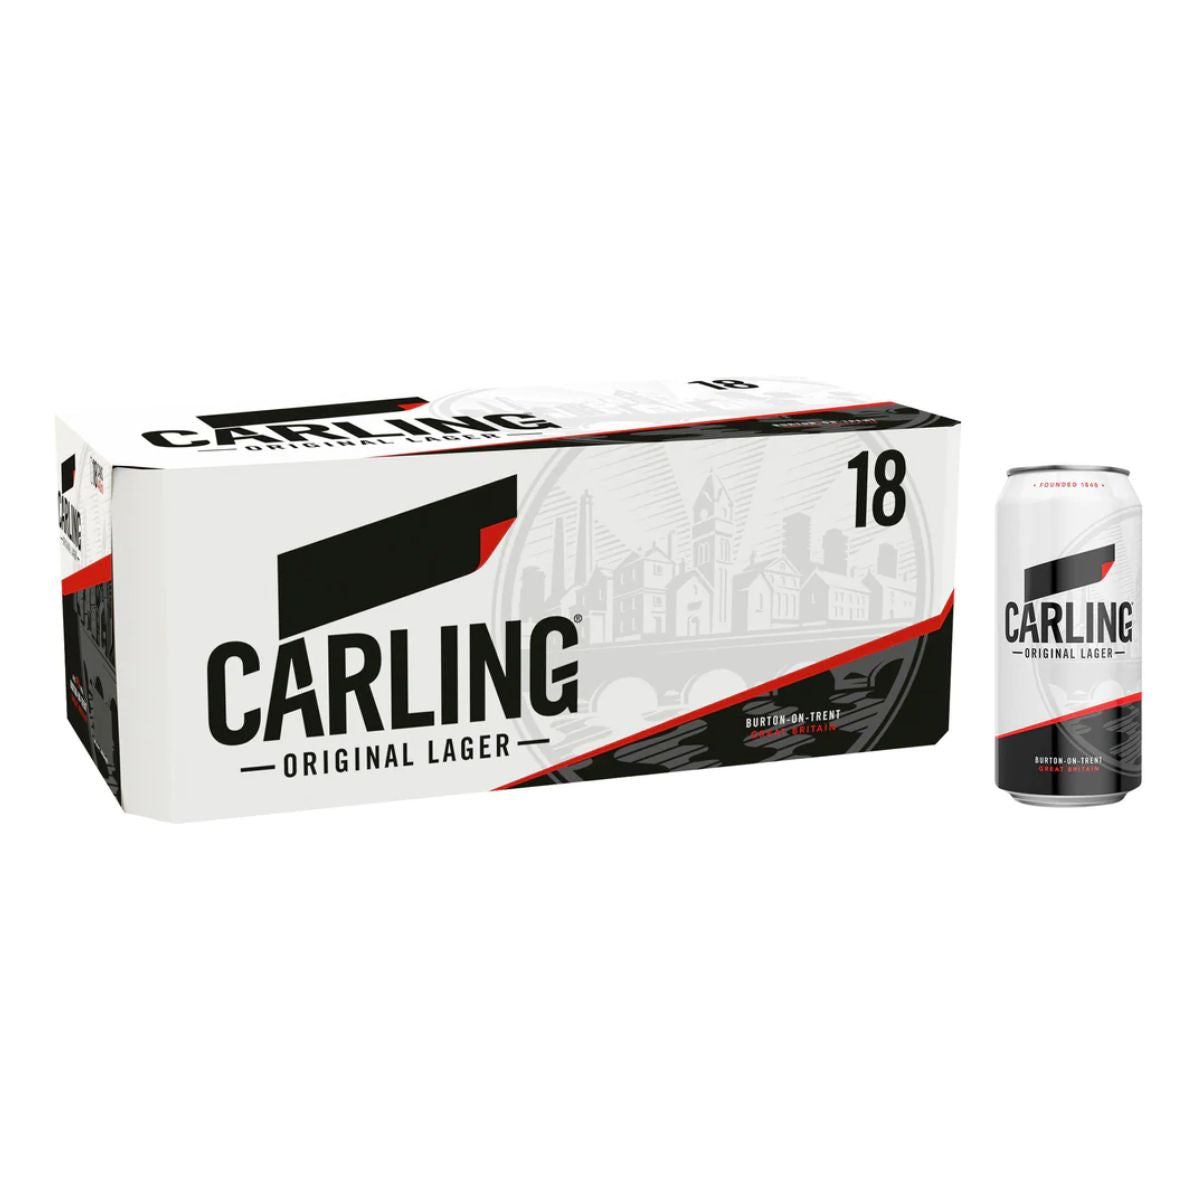 A pack of Carling - Lager Cans (4% ABV) - 18 x 440ml in front of a box.